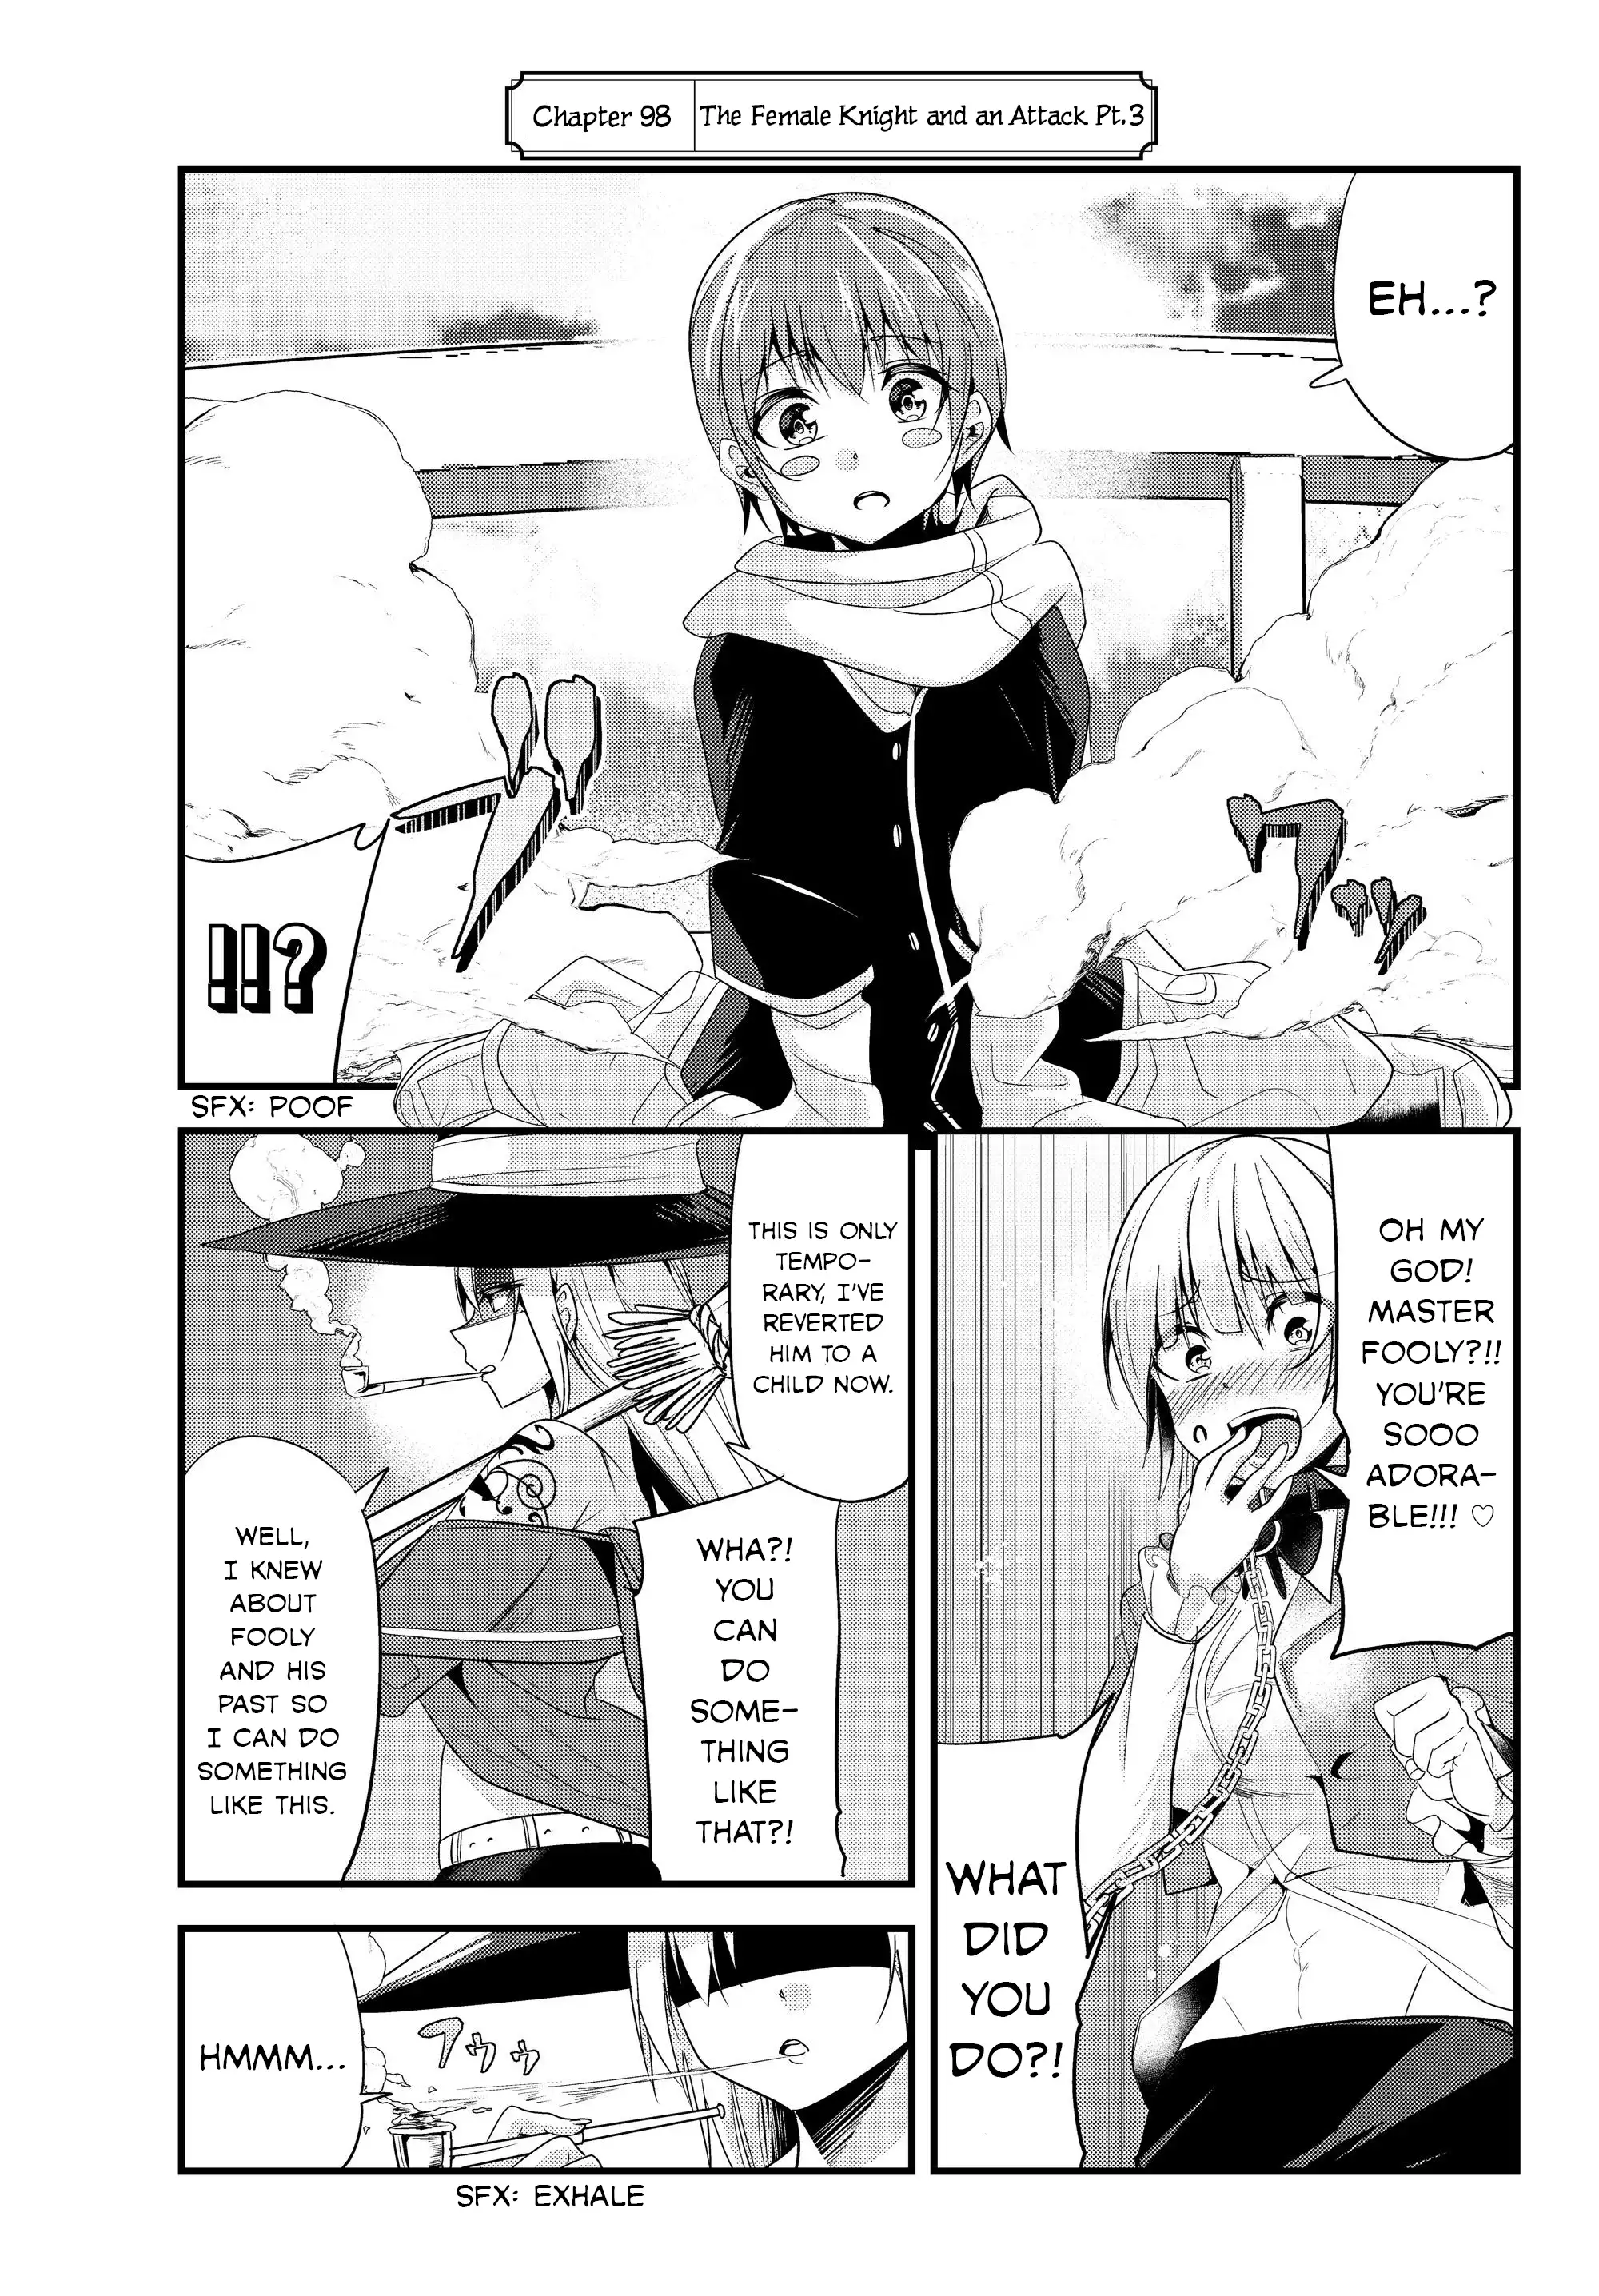 A Story About Treating a Female Knight, Who Has Never Been Treated as a Woman, as a Woman - Chapter 98 Page 3